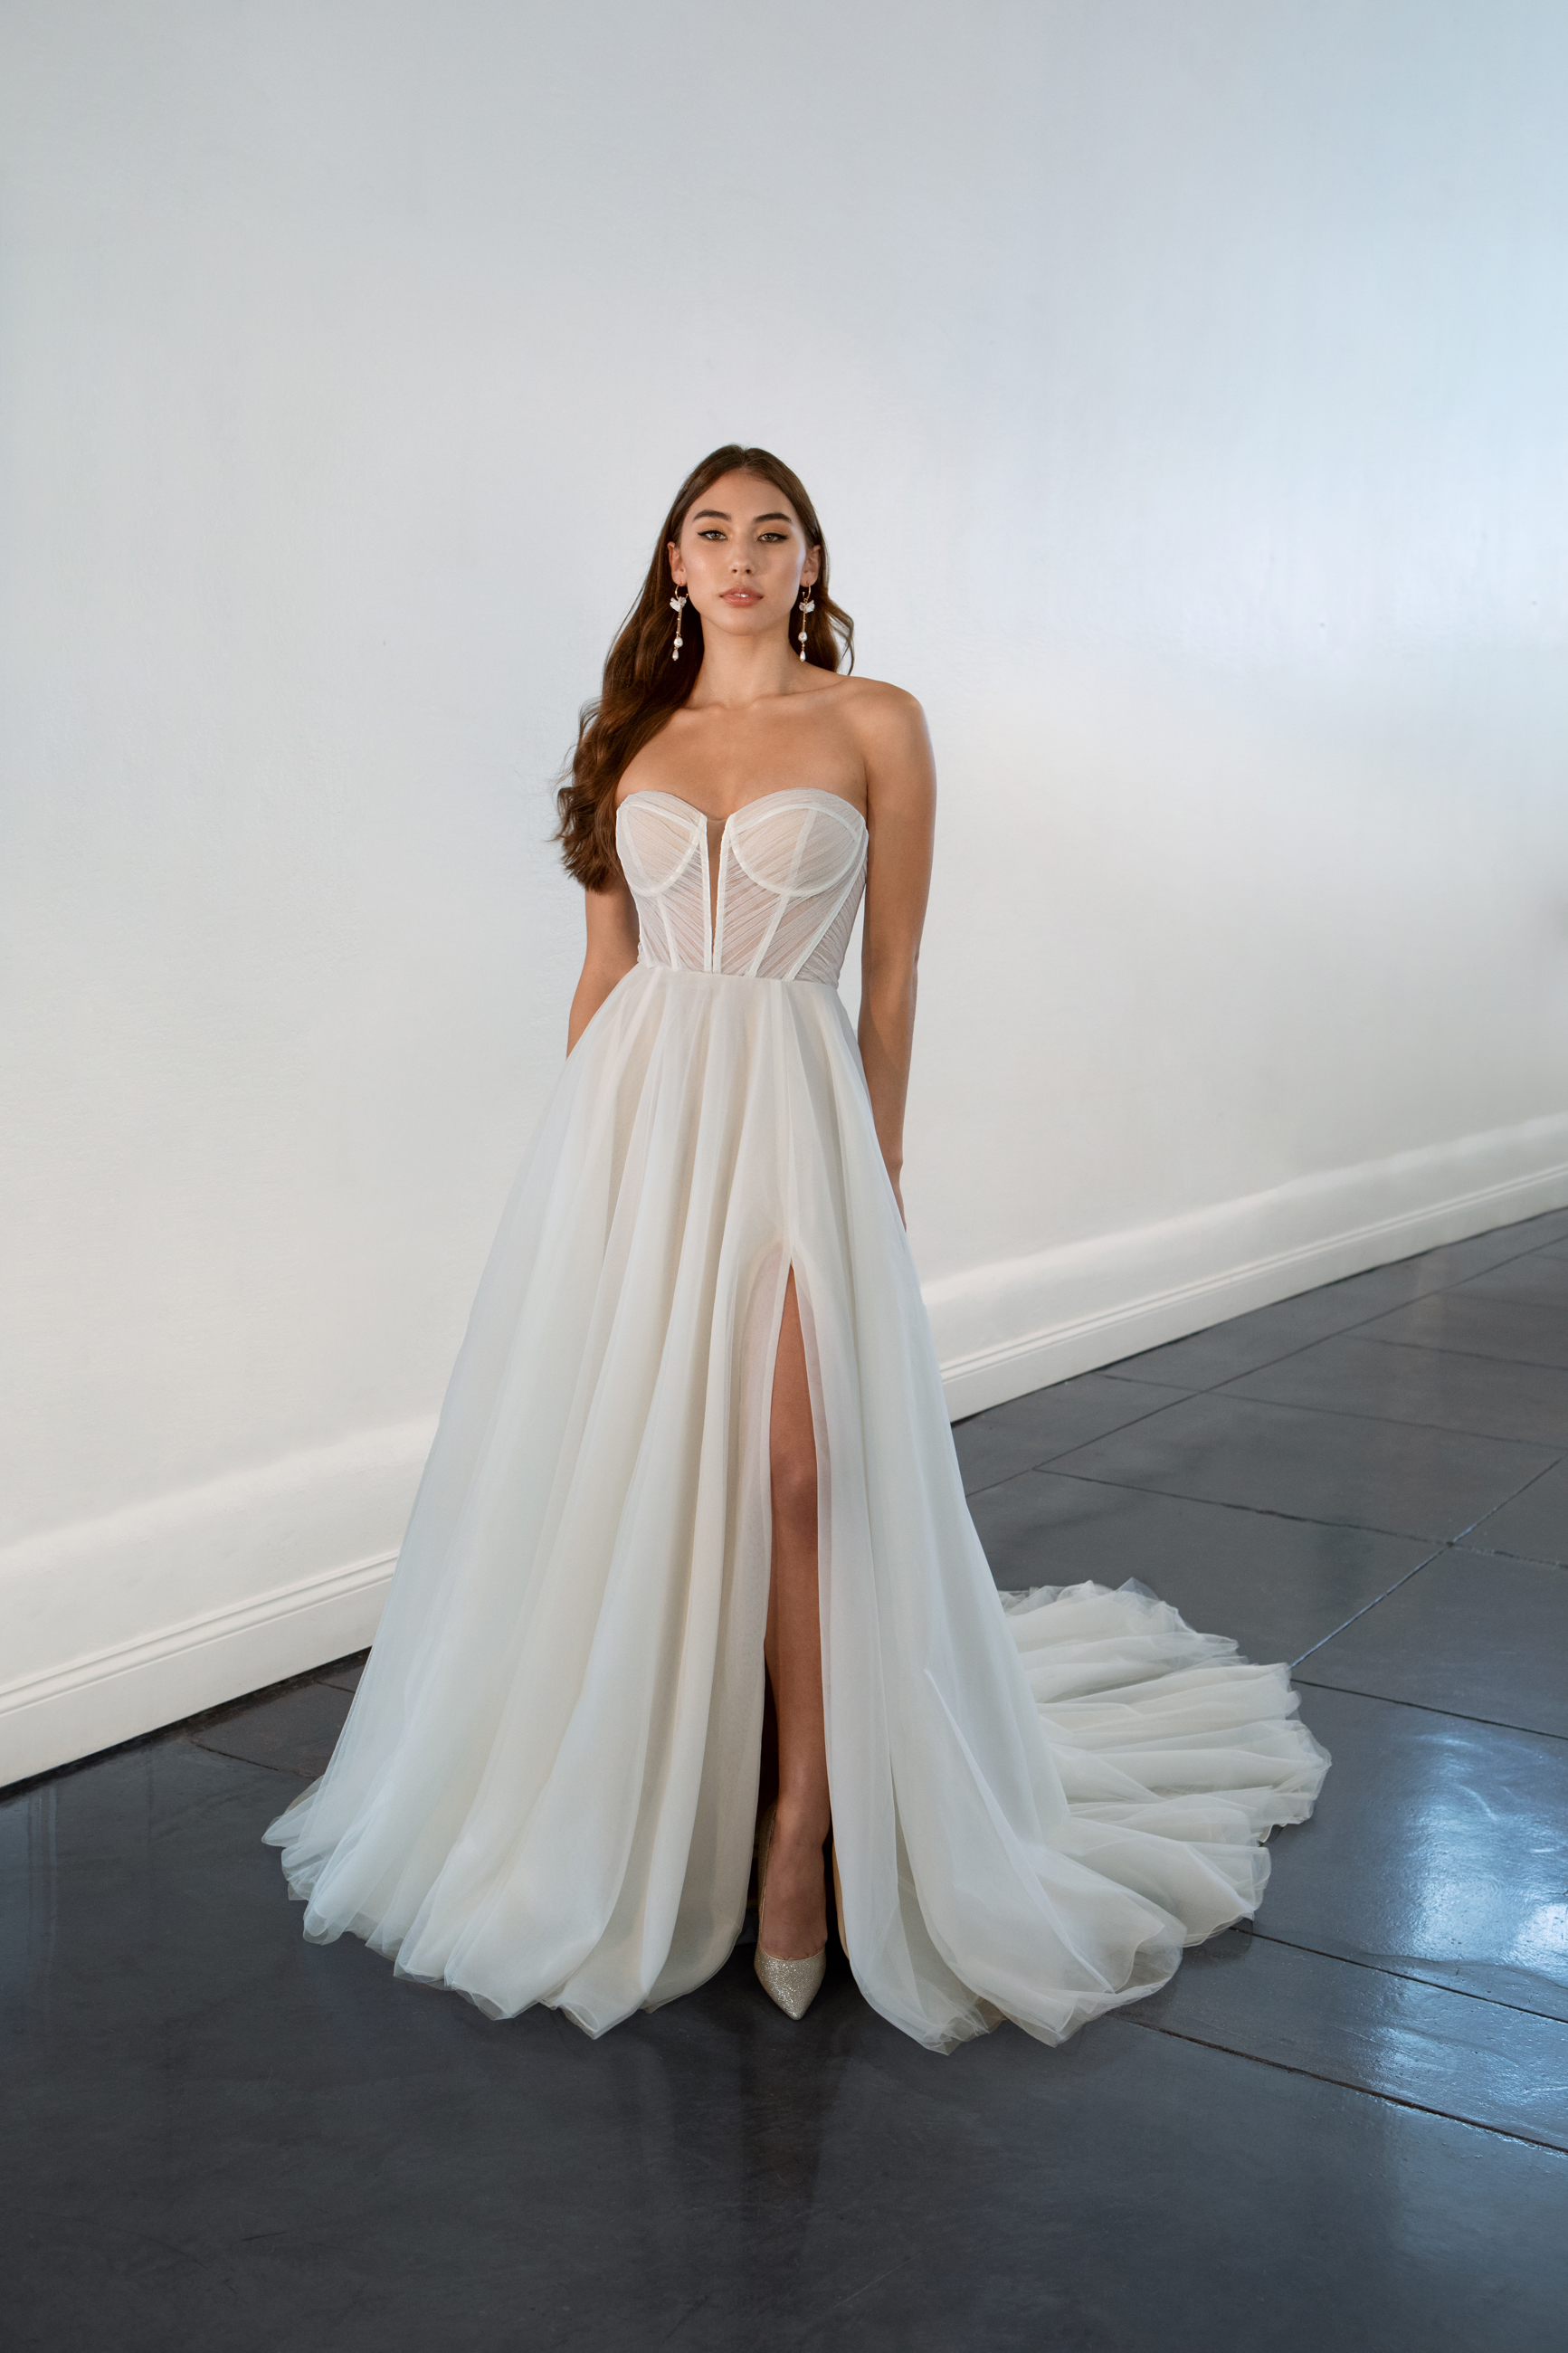 https://www.whitedressbridalboutique.com/uploads/images/products/1466/martina-liana_1497-martina-liana_(ivrm-pl)-ivory-tulle-&-royal-organza-ov-rum-gown-w-pln-tulle-plunge_12_0.jpg?w=2000